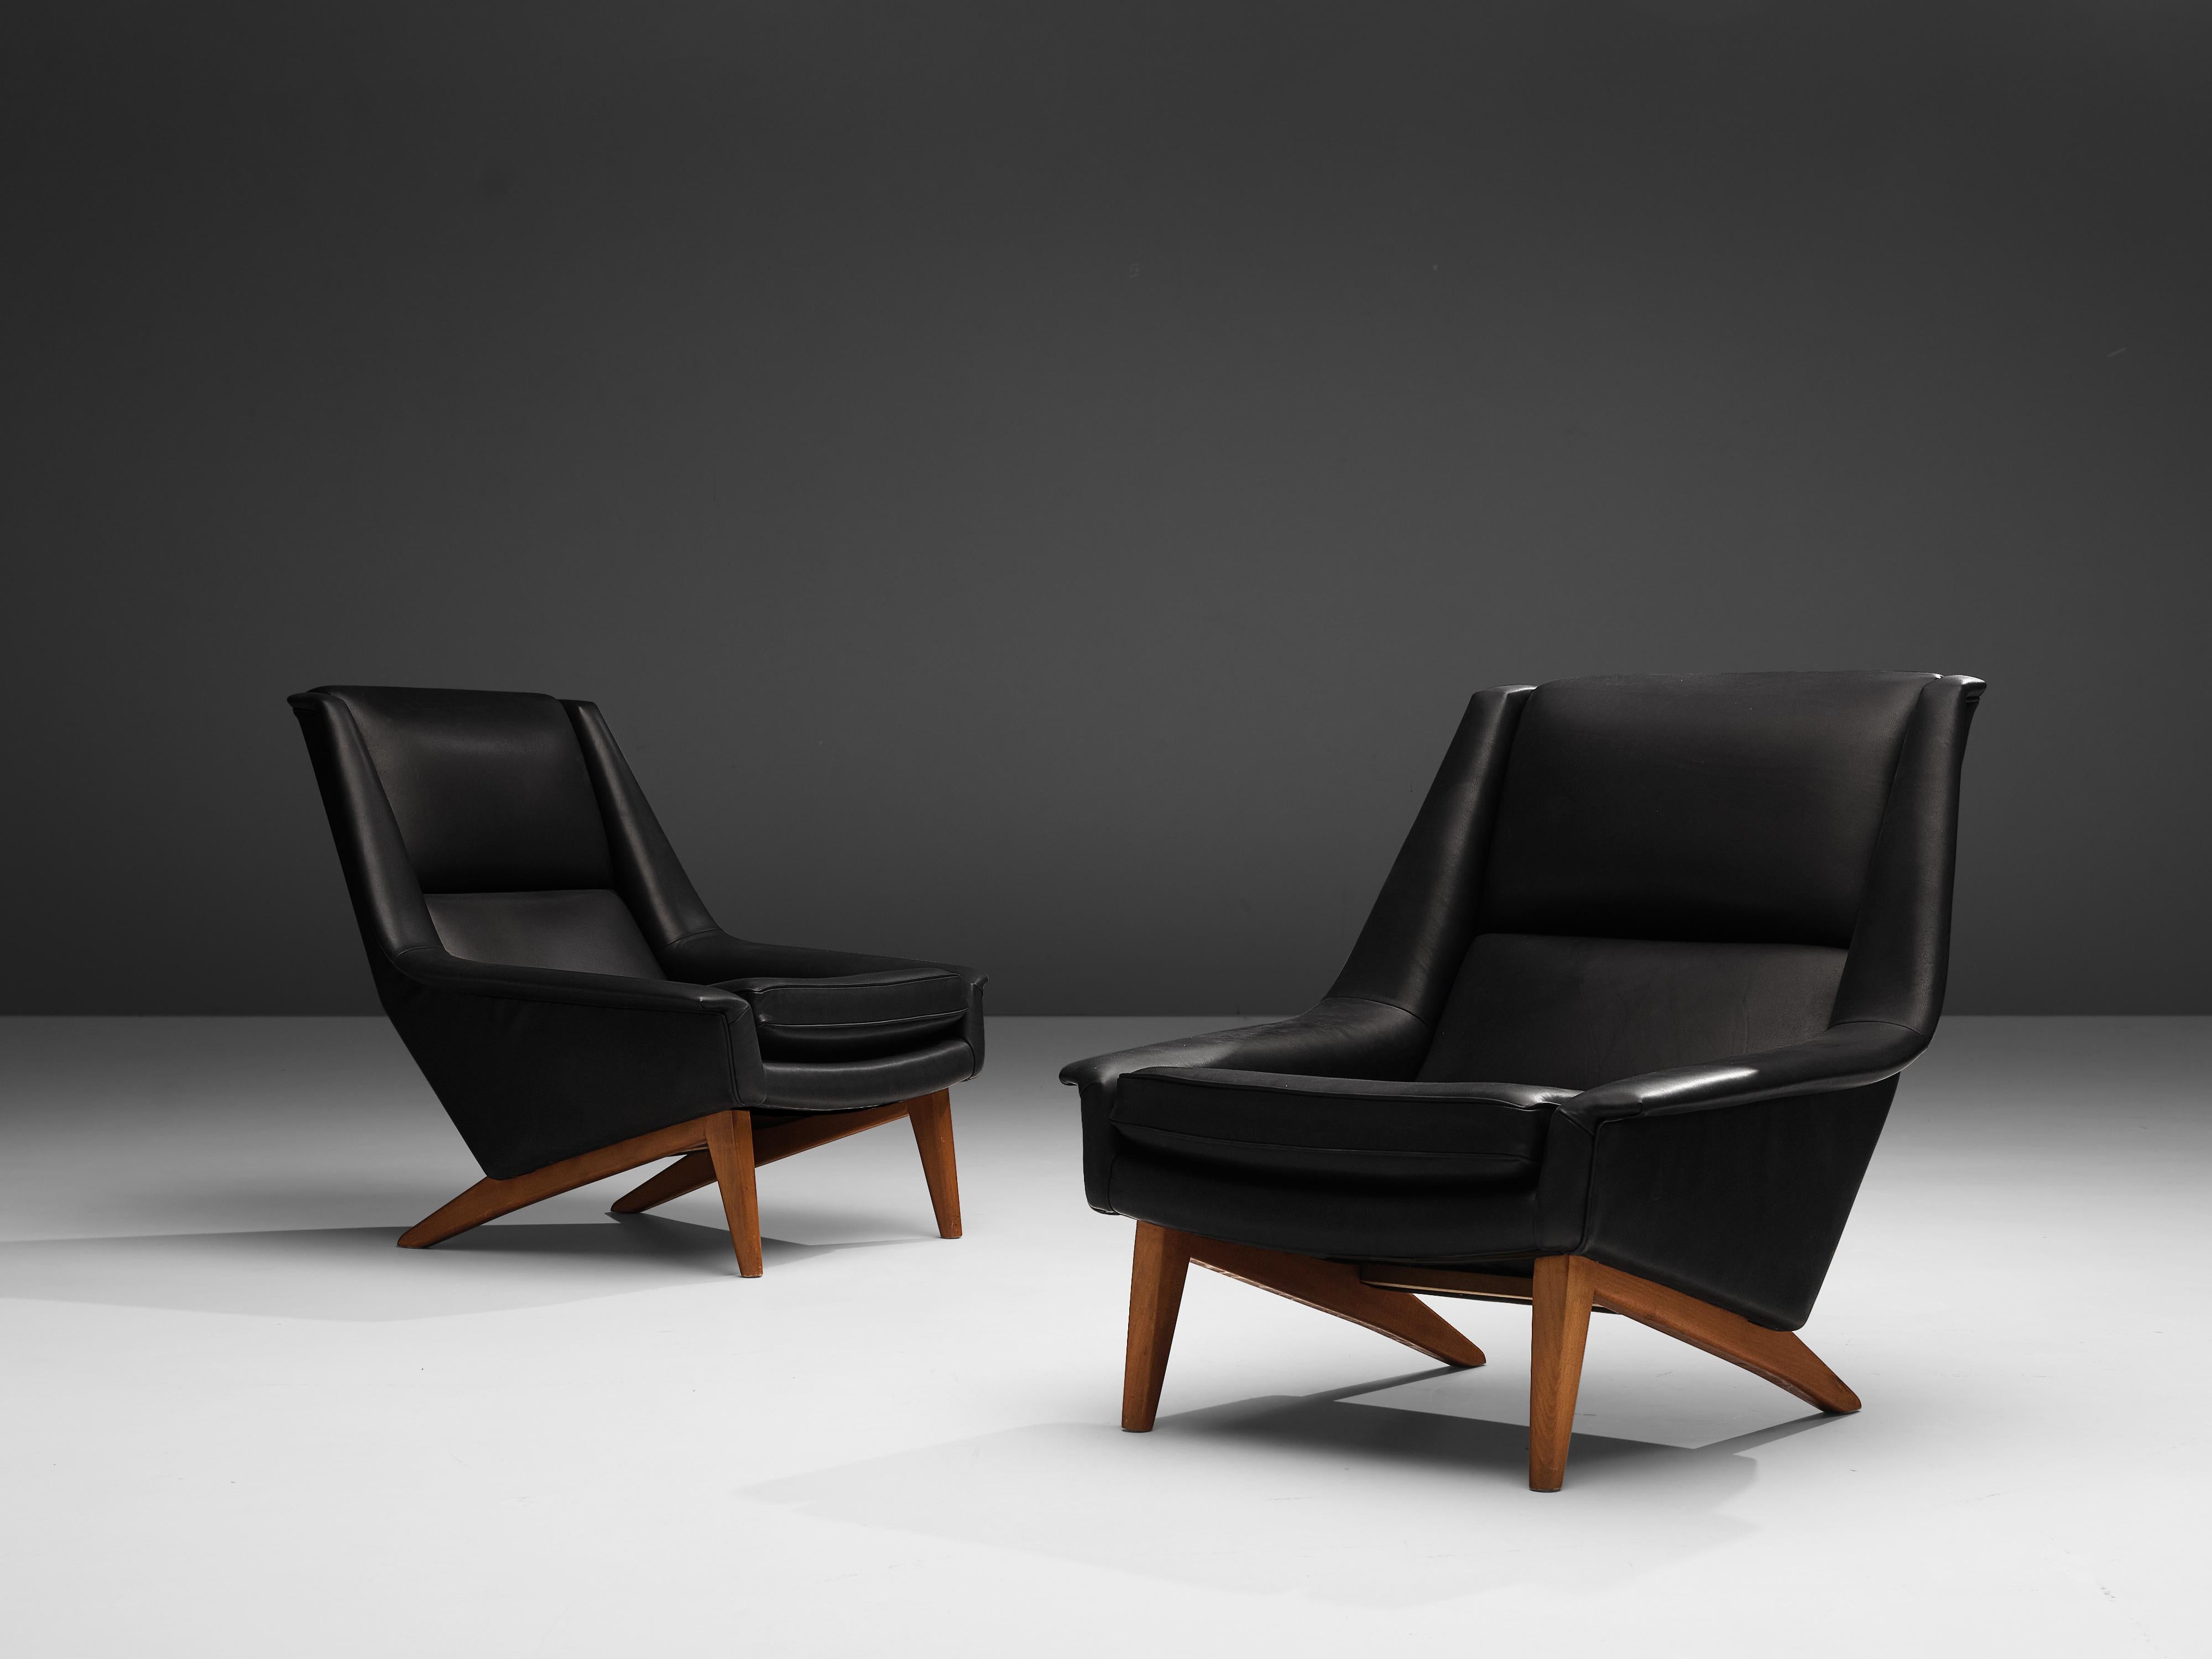 Folke Ohlsson for Fritz Hansen, reupholstered lounge chairs model 4410, black leather, teak, Denmark, design 1957

Beautiful reupholstered lounge chairs by Danish designer Folke Ohlsson designed in 1957. These two ‘4410’ lounge chairs have been